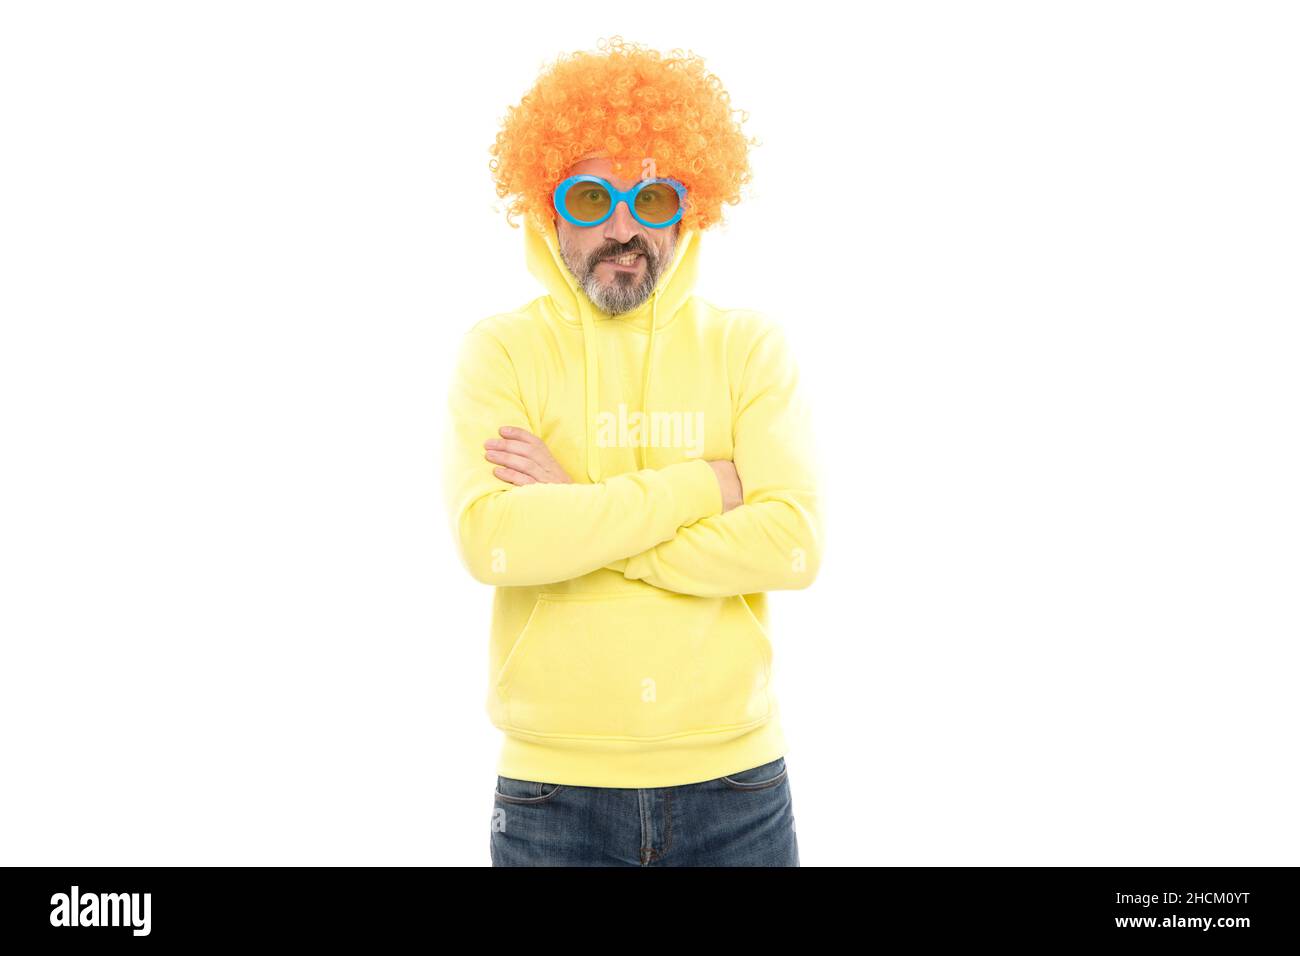 Funny man wear orange color wig with geeky look keep arms crossed, extravagant Stock Photo